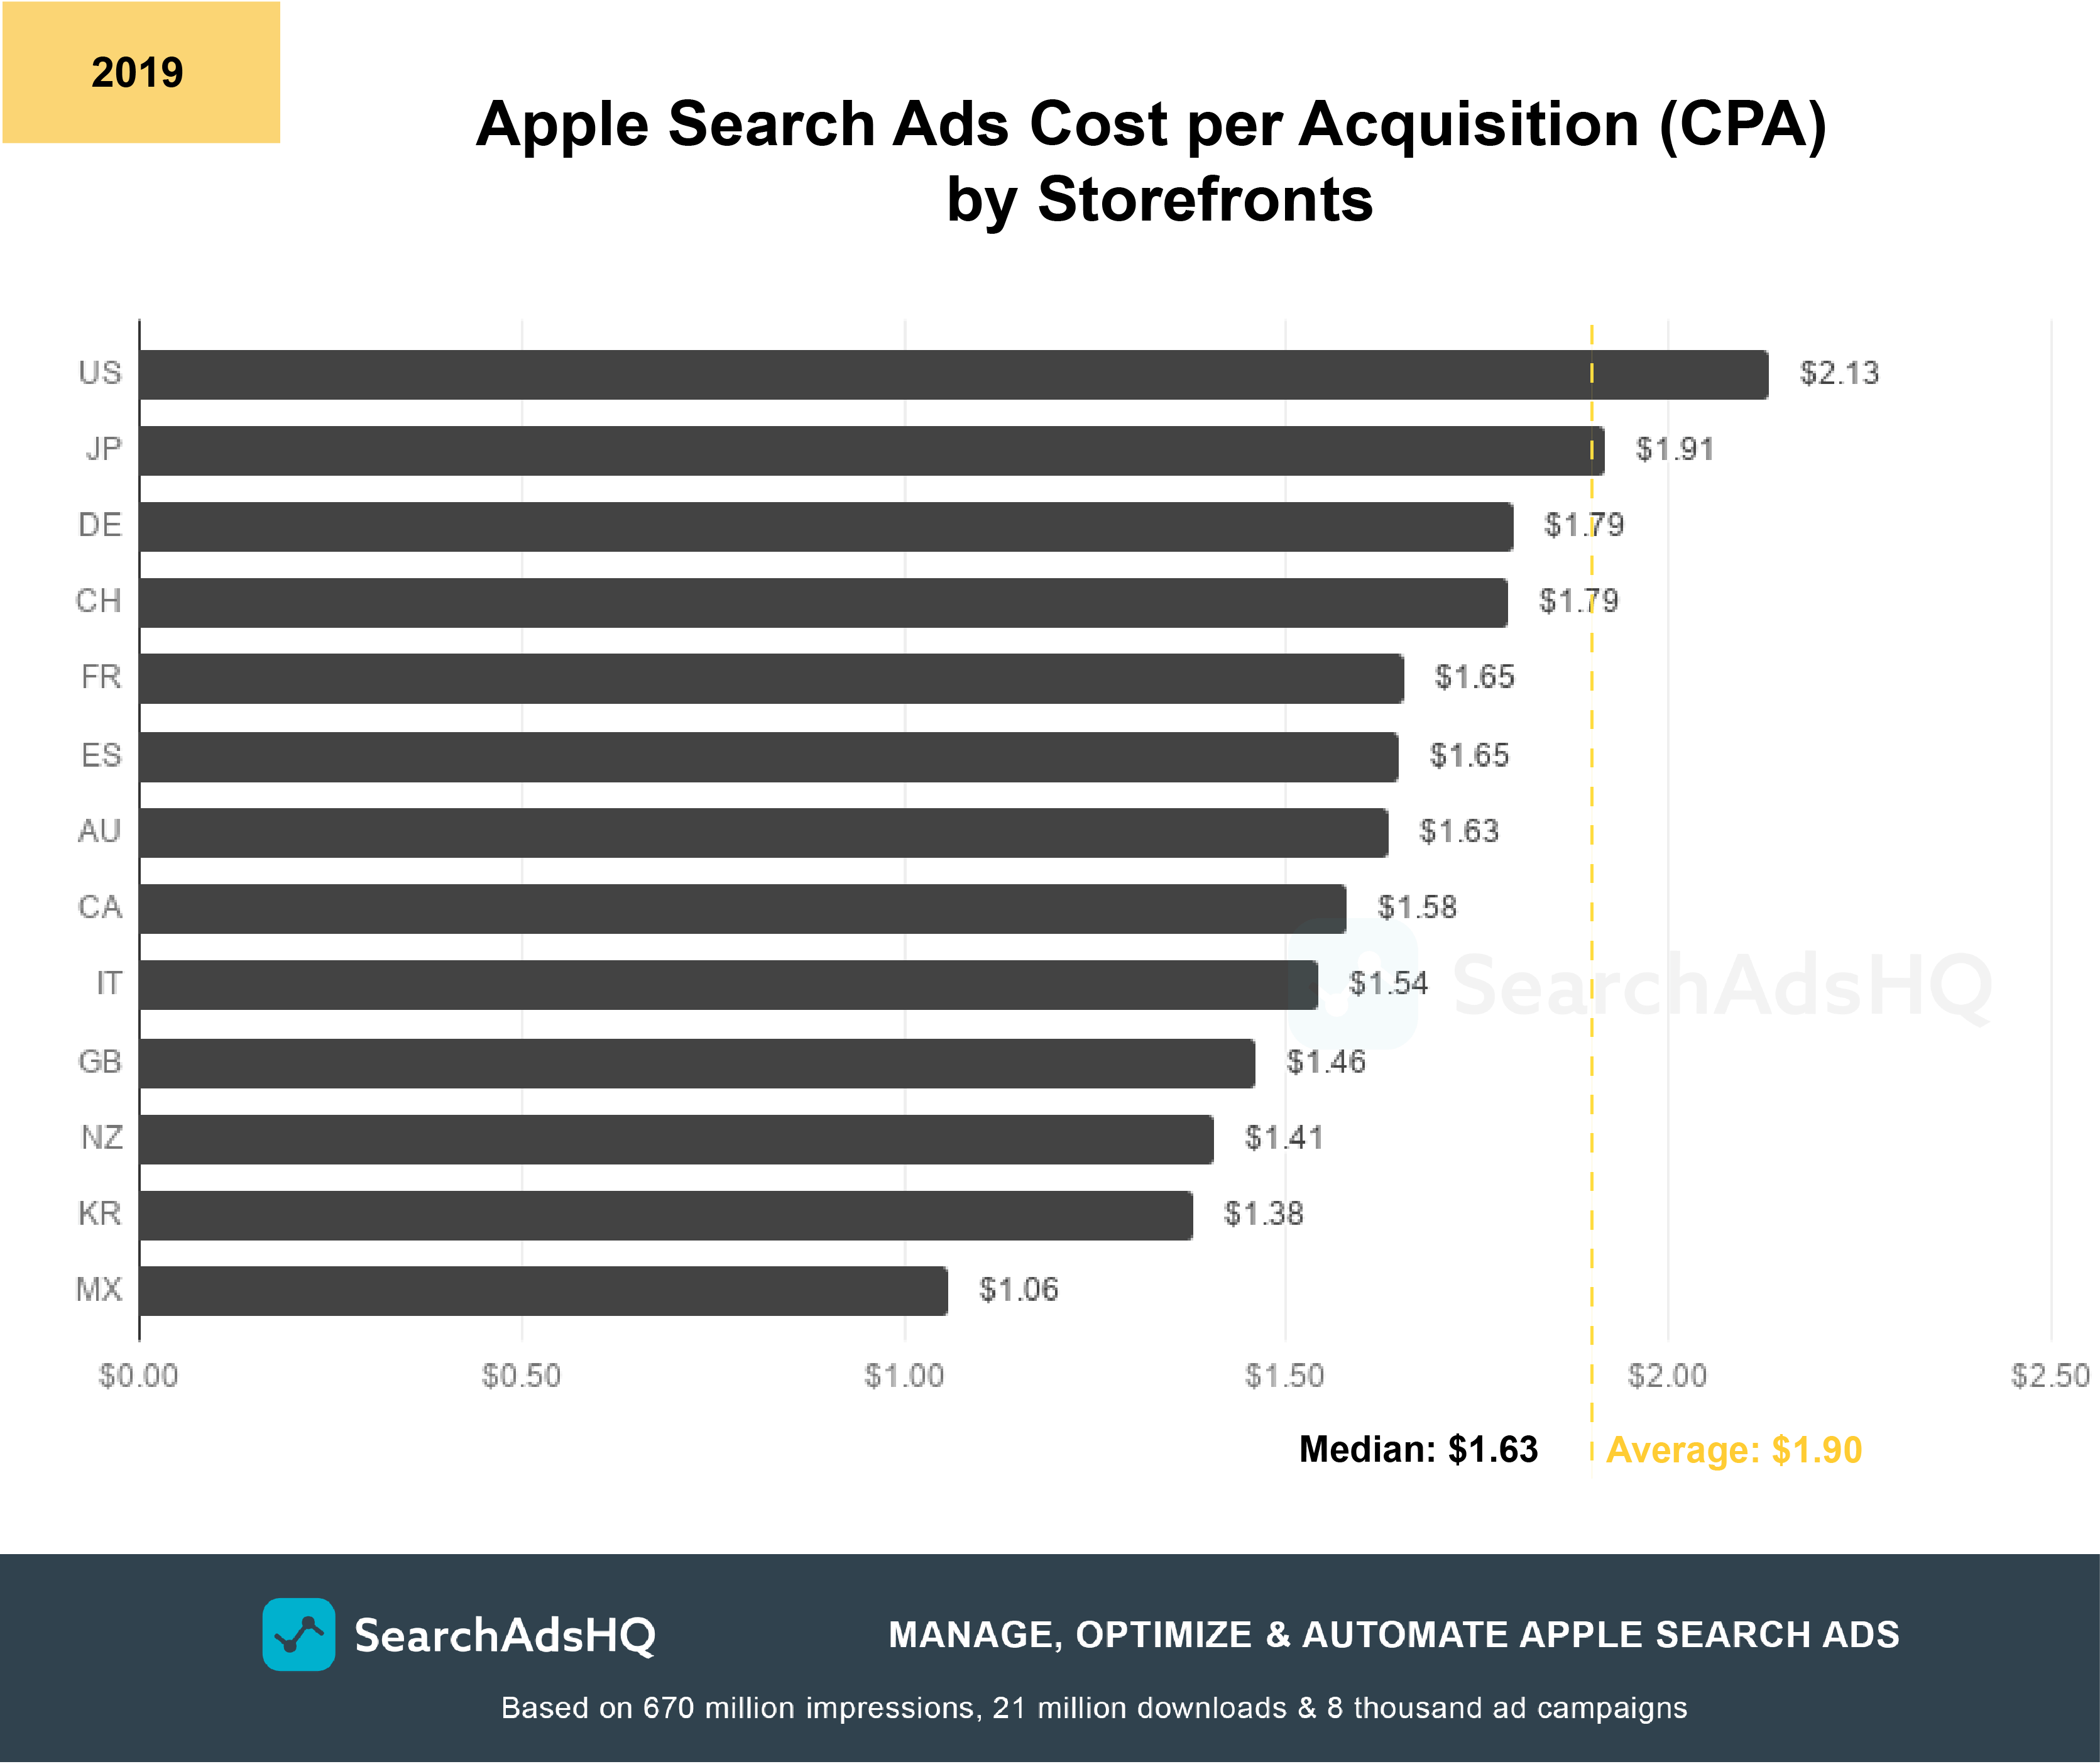 Apple Search Ads benchmarks: CPA by storefronts